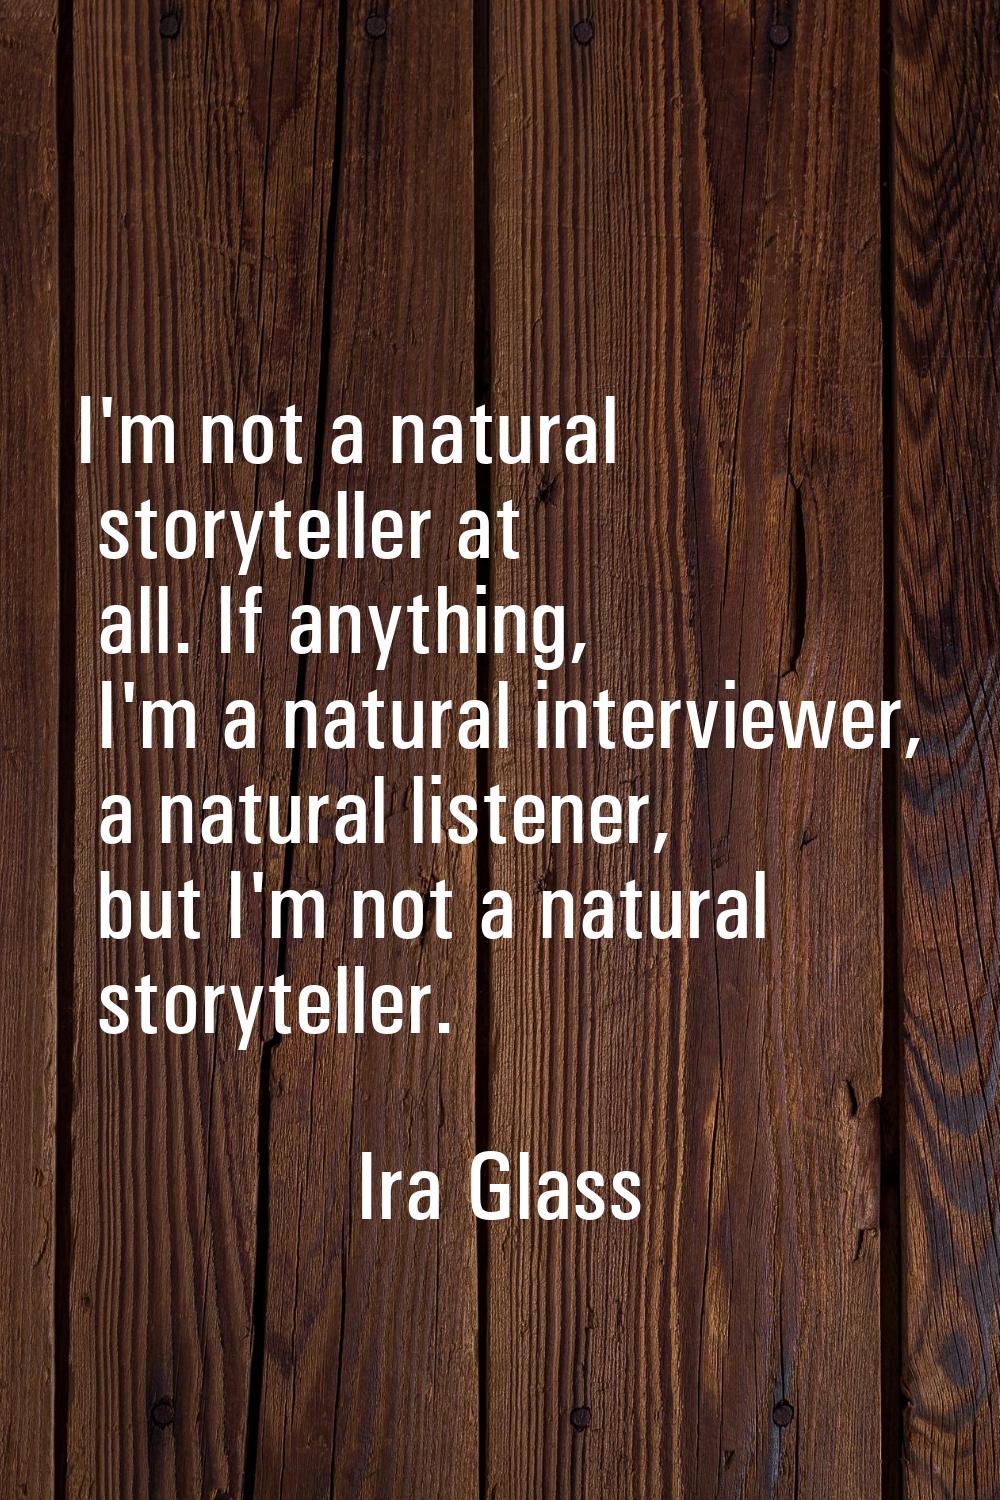 I'm not a natural storyteller at all. If anything, I'm a natural interviewer, a natural listener, b